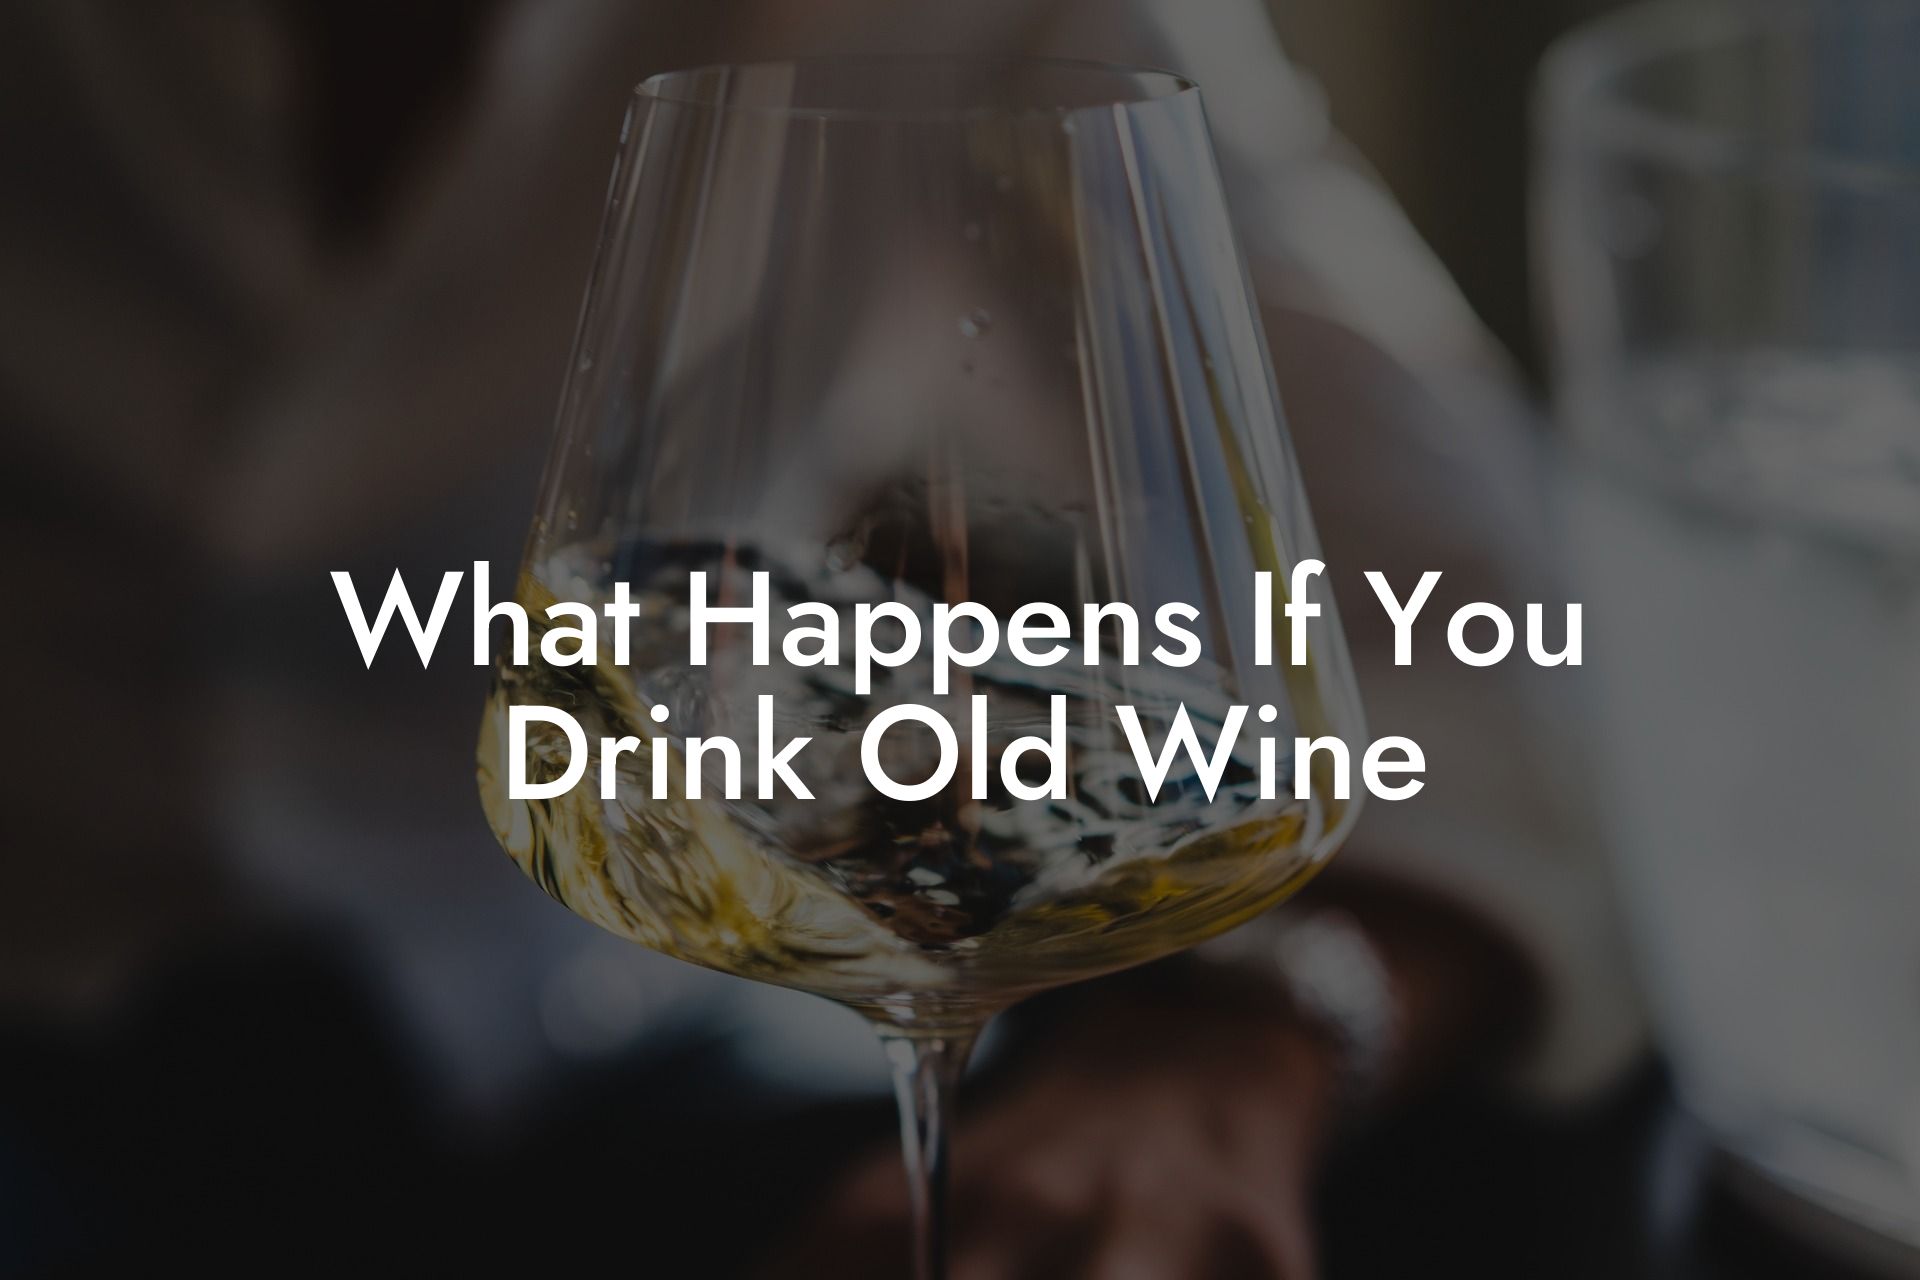 What Happens If You Drink Old Wine